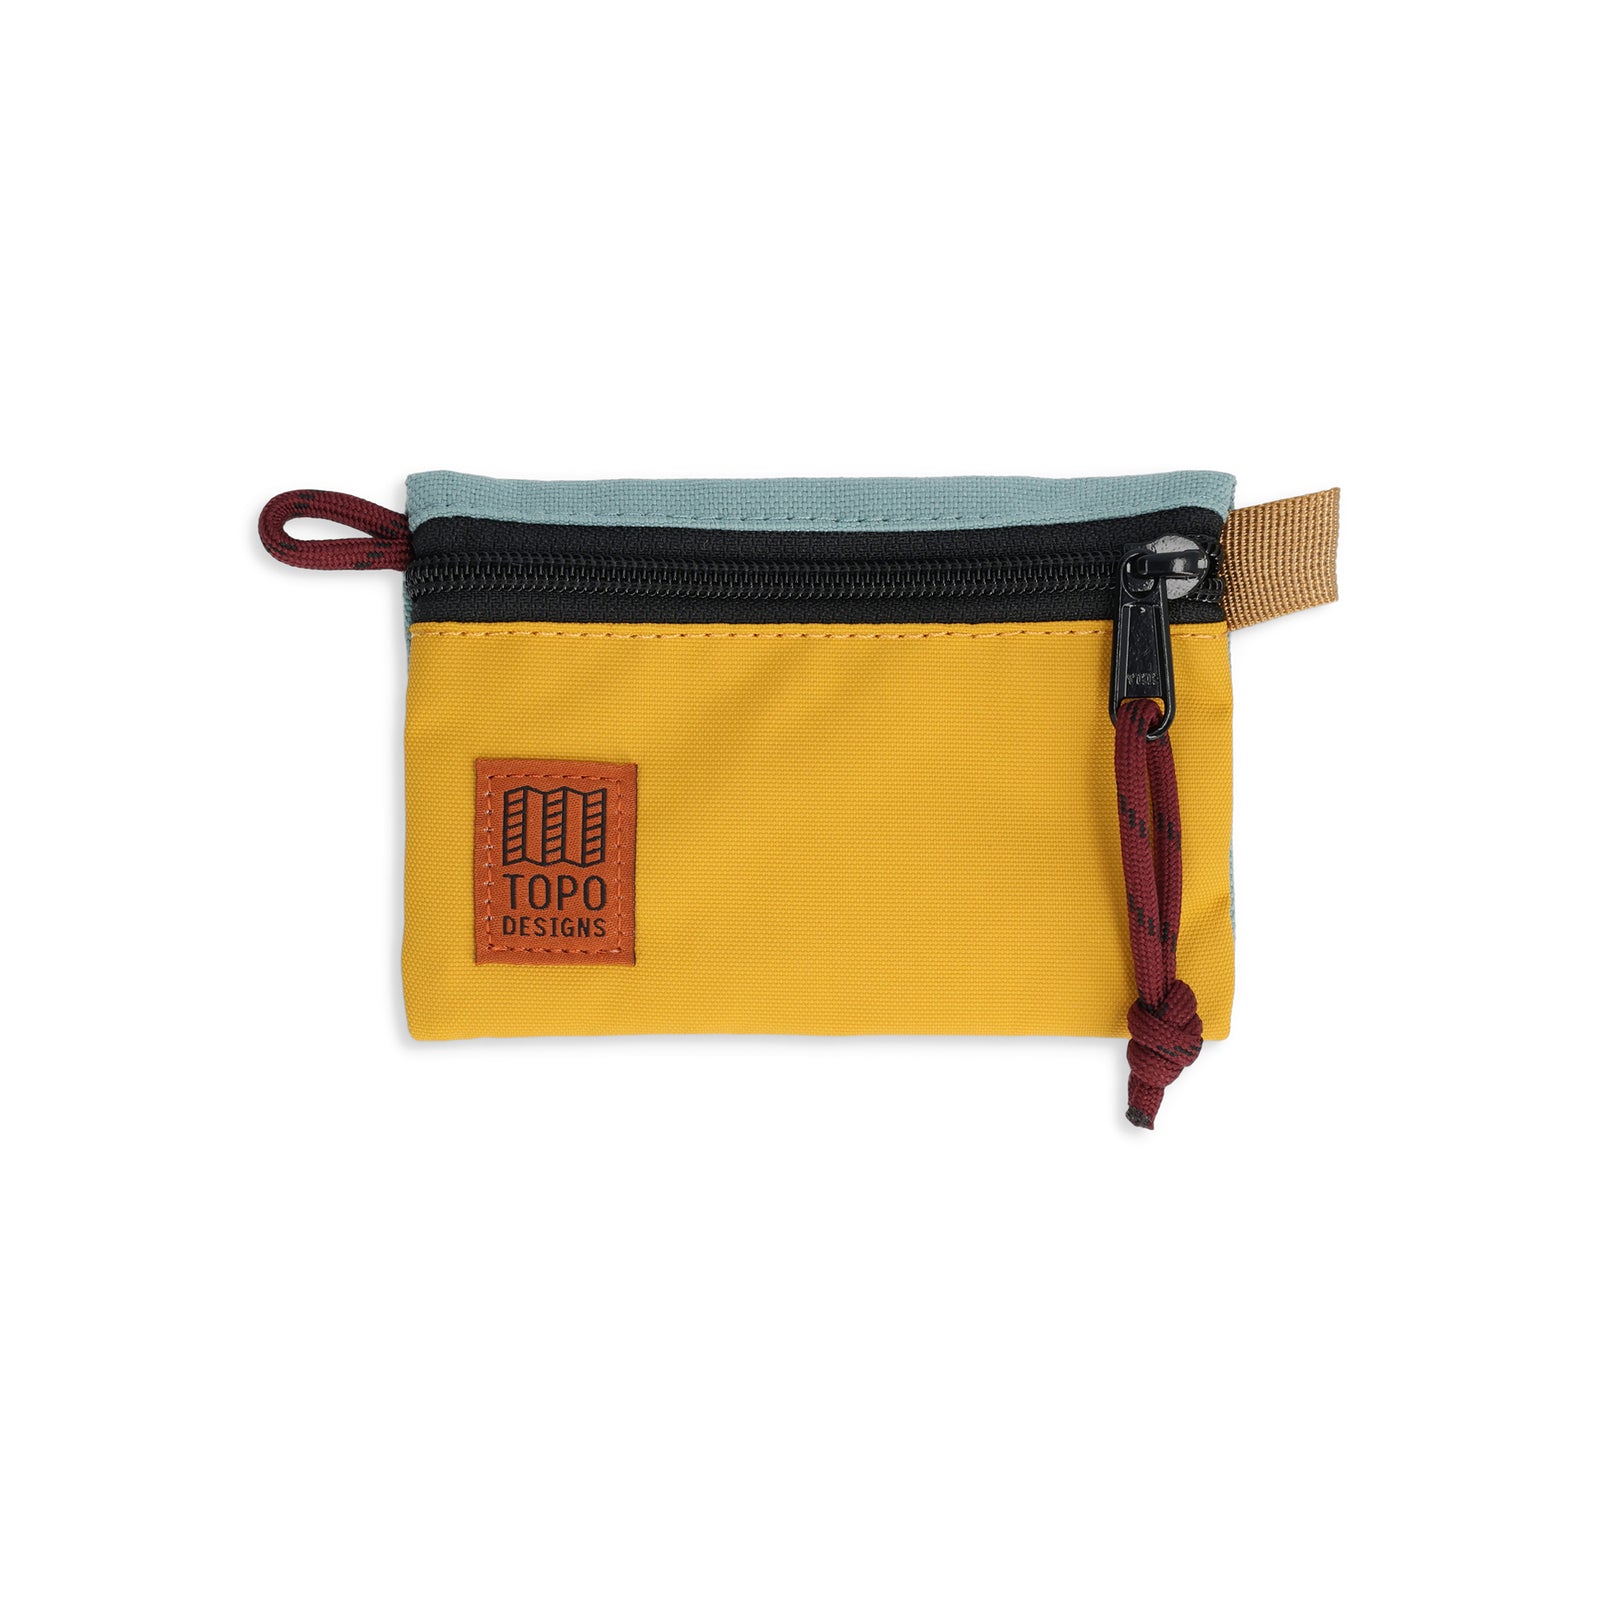 Topo Designs Accessory Bag in "Micro" "Sage / Mustard - Recycled"